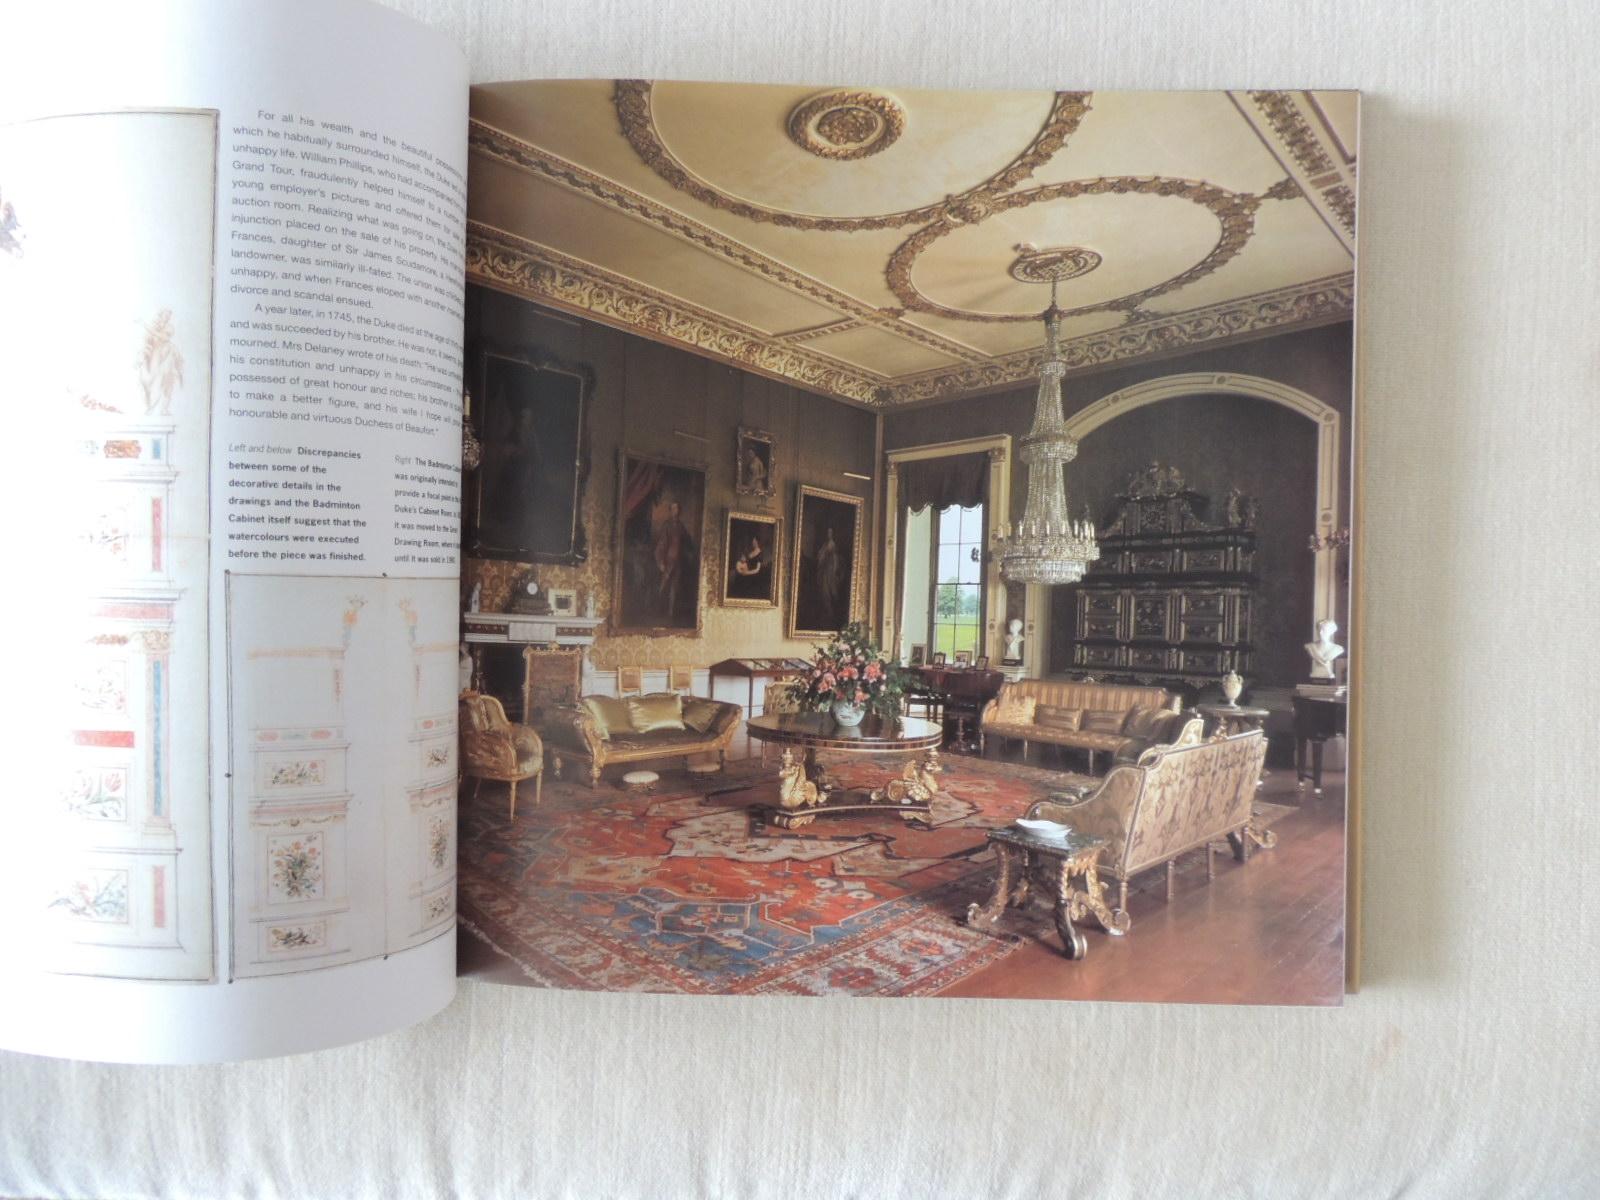 Extraordinary furniture by D. Linley hard cover coffee table book
Extraordinary furniture presents some of the world's most opulent, inventive, skillfully made, and unusual pieces of furniture. Author David Linley has compiled a magnificent array